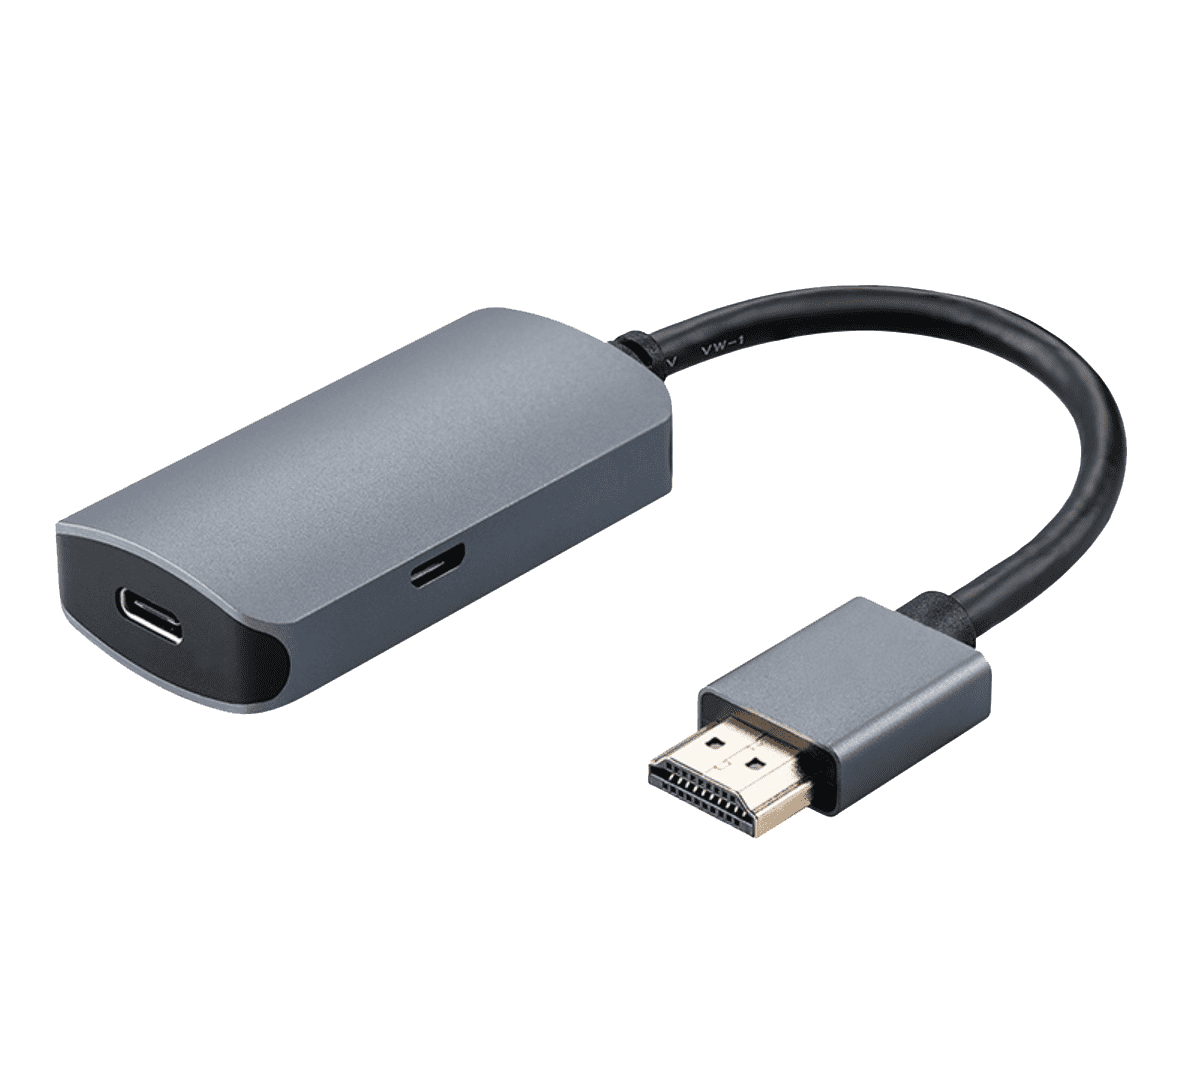 Basics USB-C 3.1 Male to HDMI Female Adapter (4K@60Hz), Gray, 1.69 x  1.45 x 0.43 inches